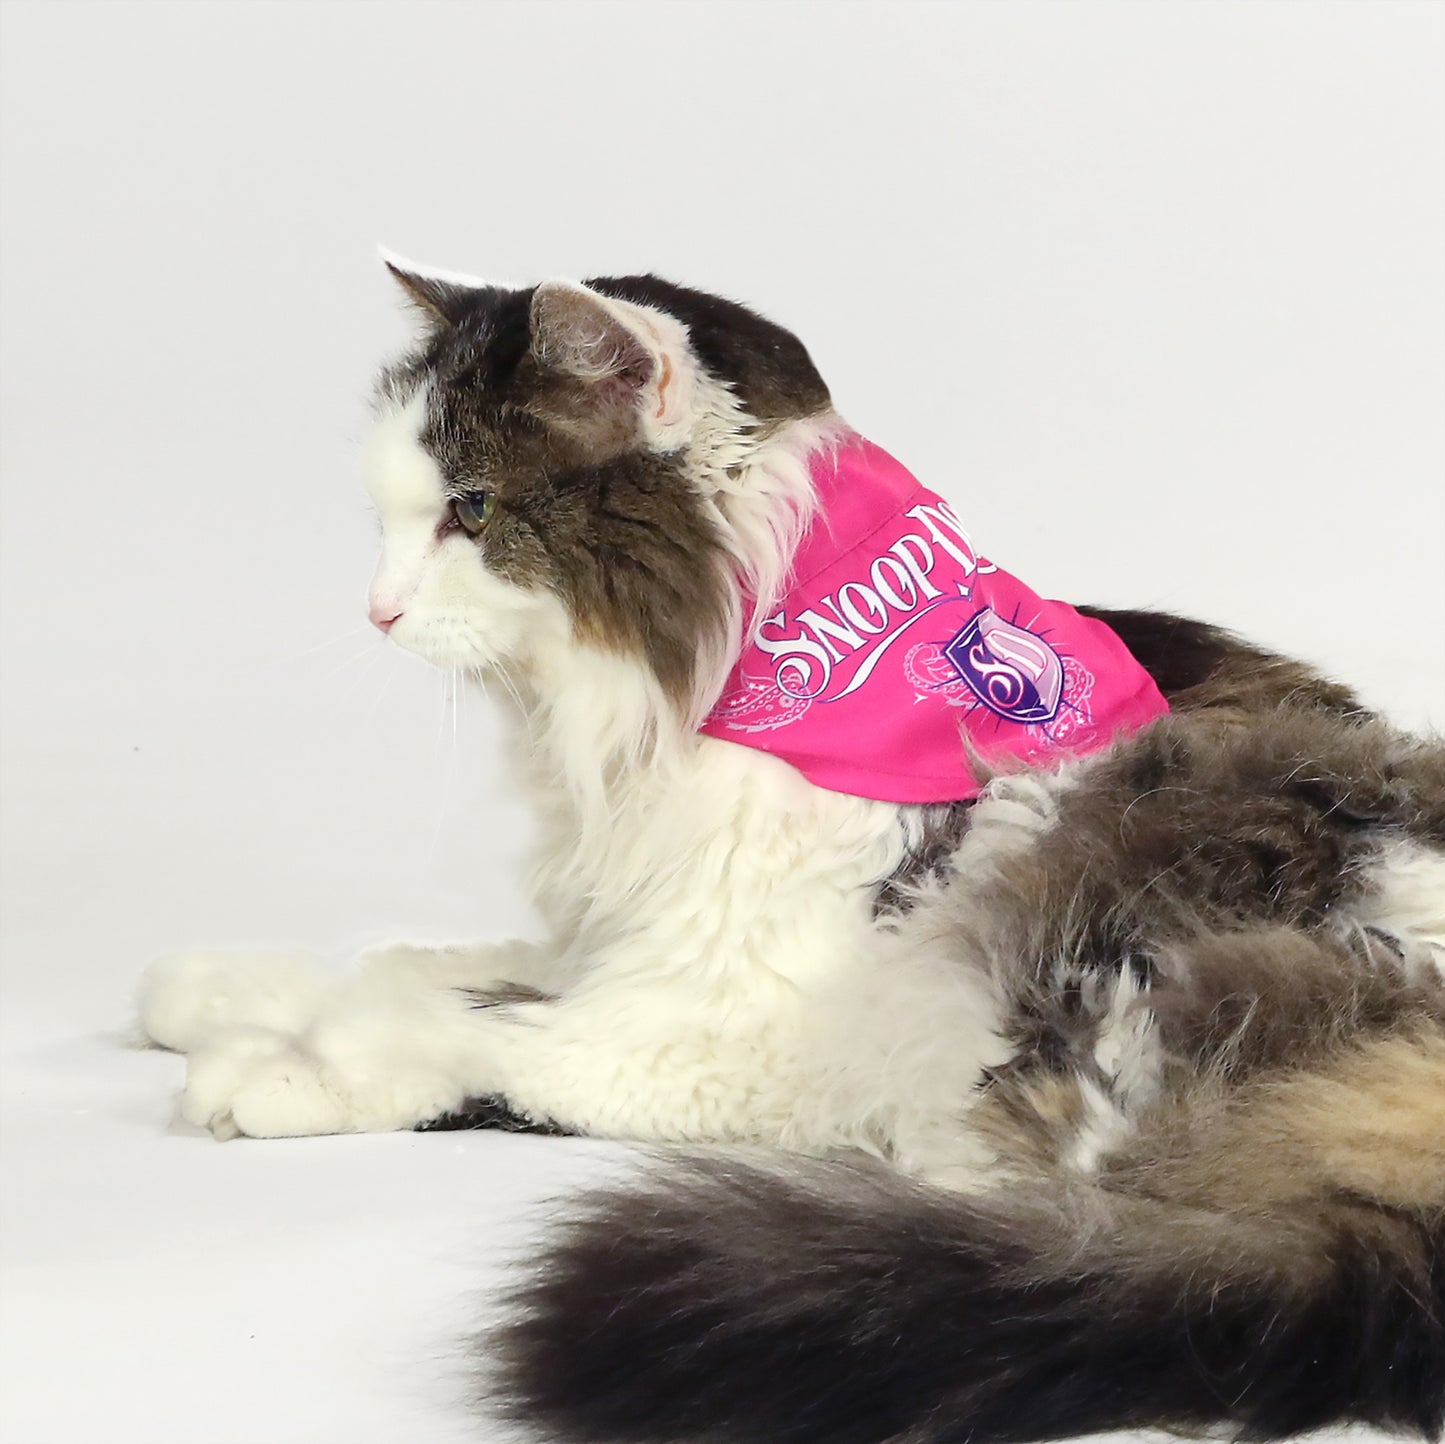 River the Norwegian Forest Cat wearing the Boss Lady Pet Bandana in size Small.